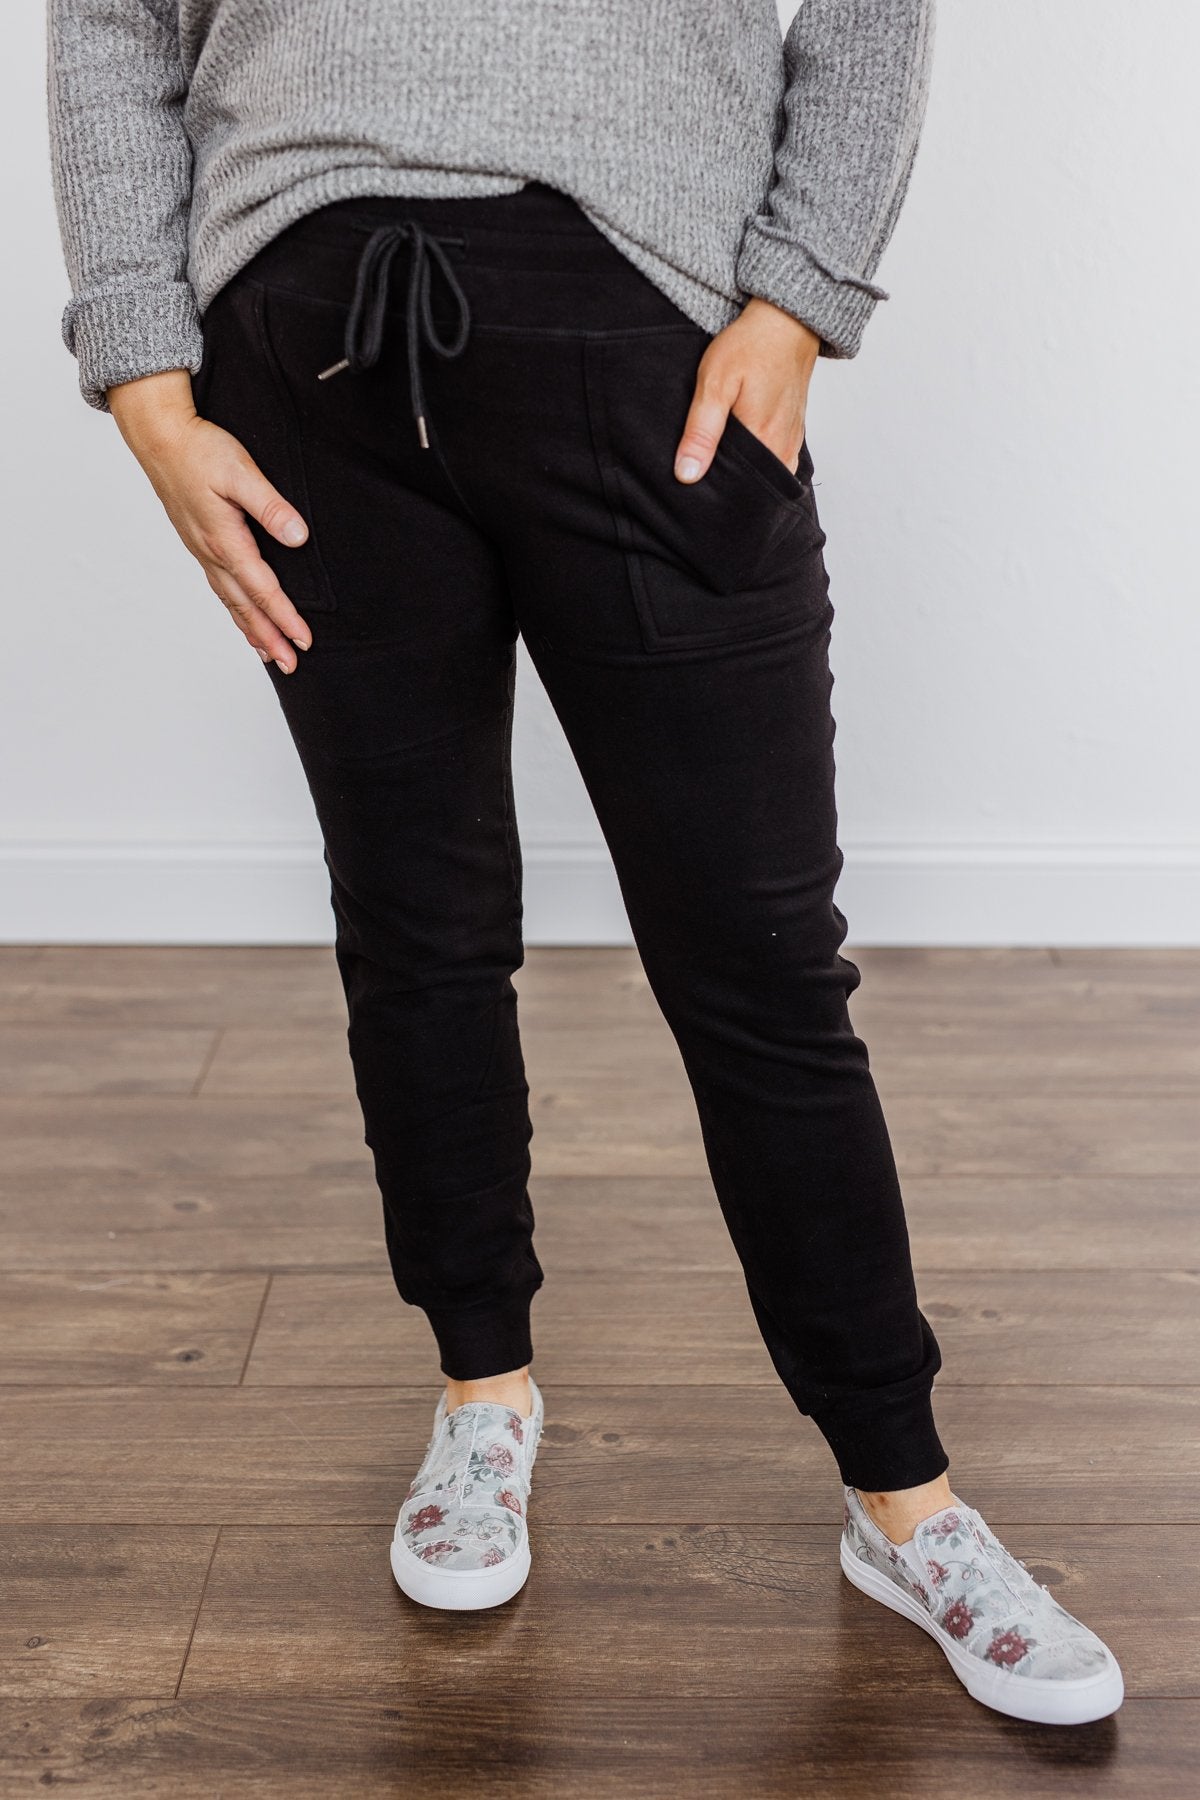 Warm Thoughts Super Soft Joggers- Black – The Pulse Boutique